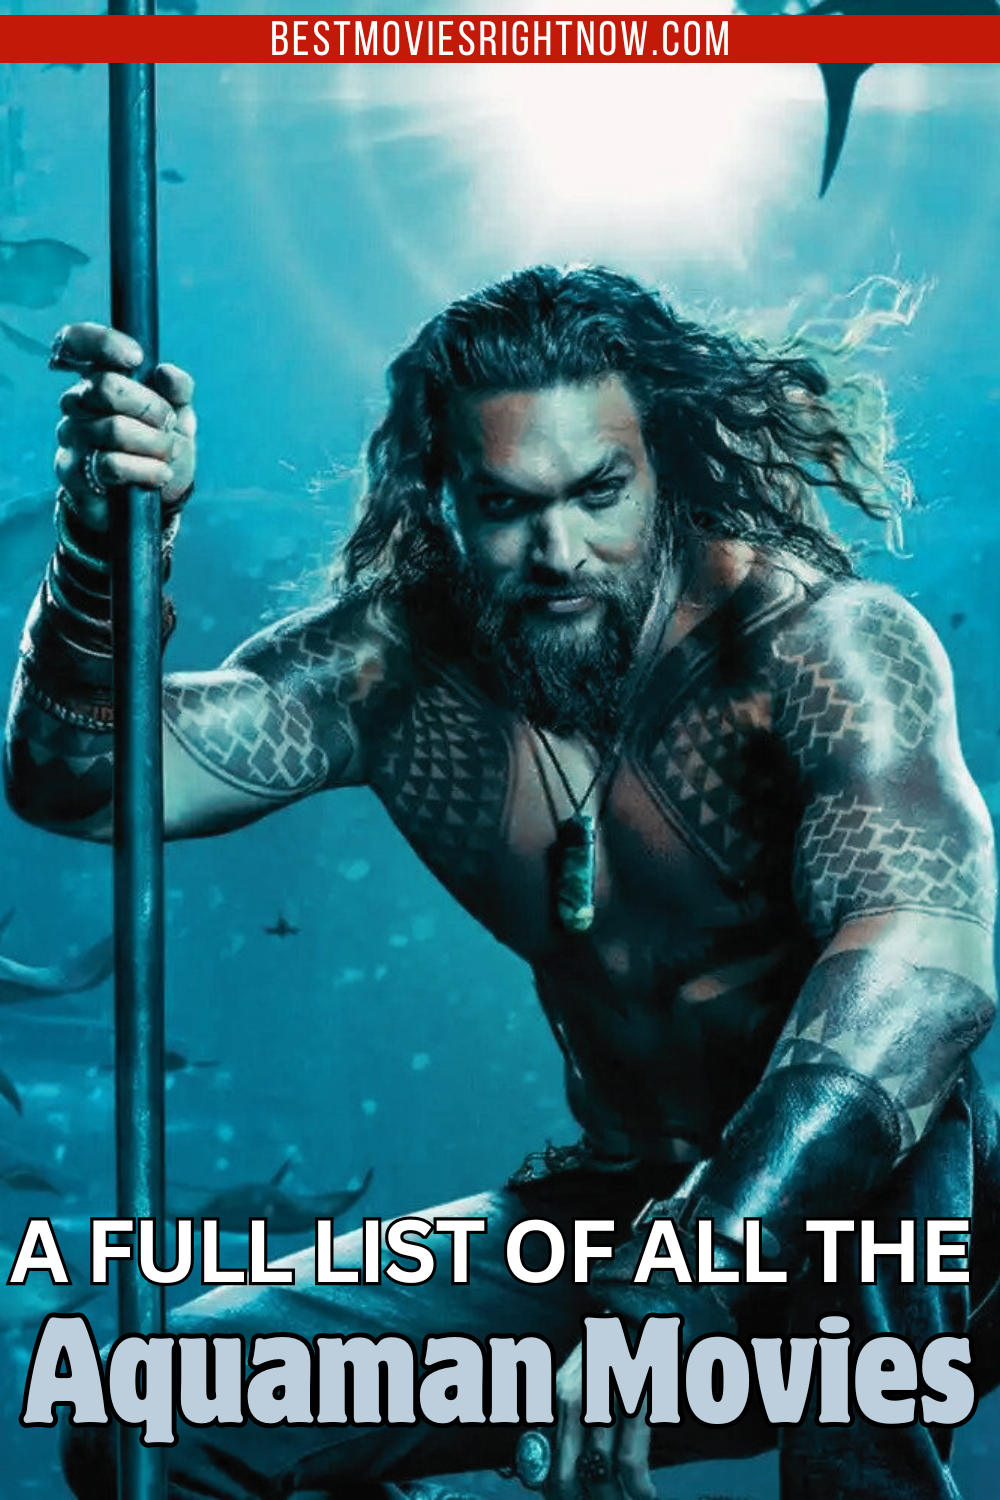 An image of Aquaman with text: 